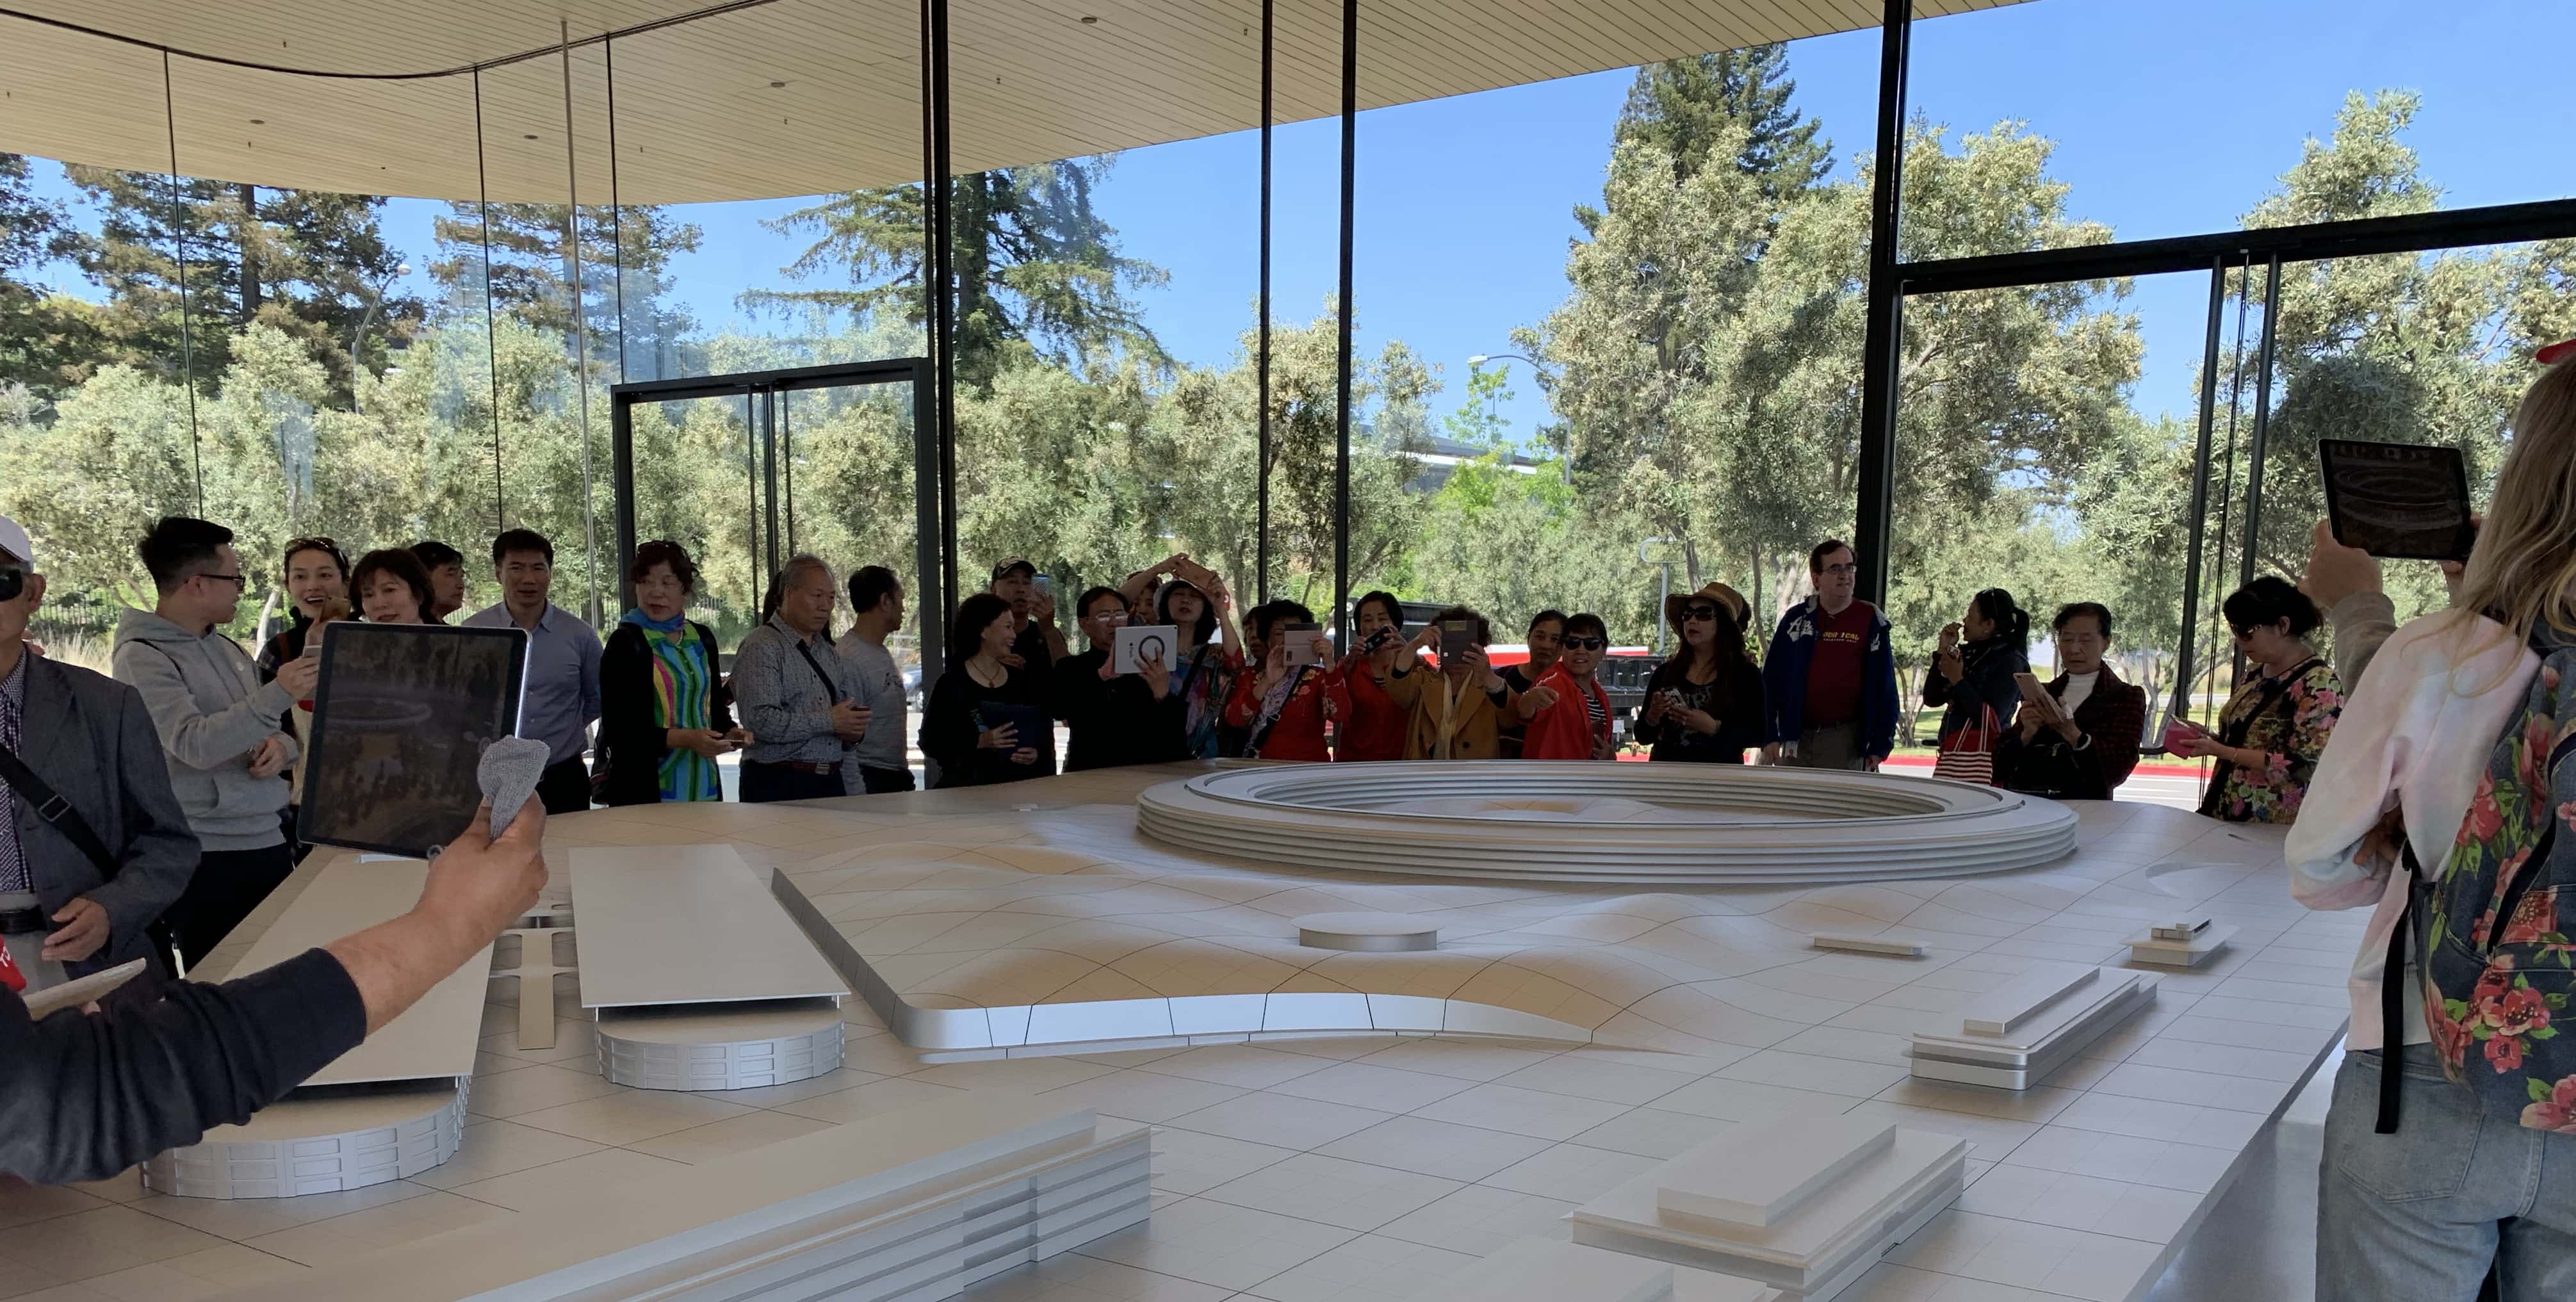 At Apple Park, tourists already use iPads to see virtual landmarks pop up on a model of the campus.